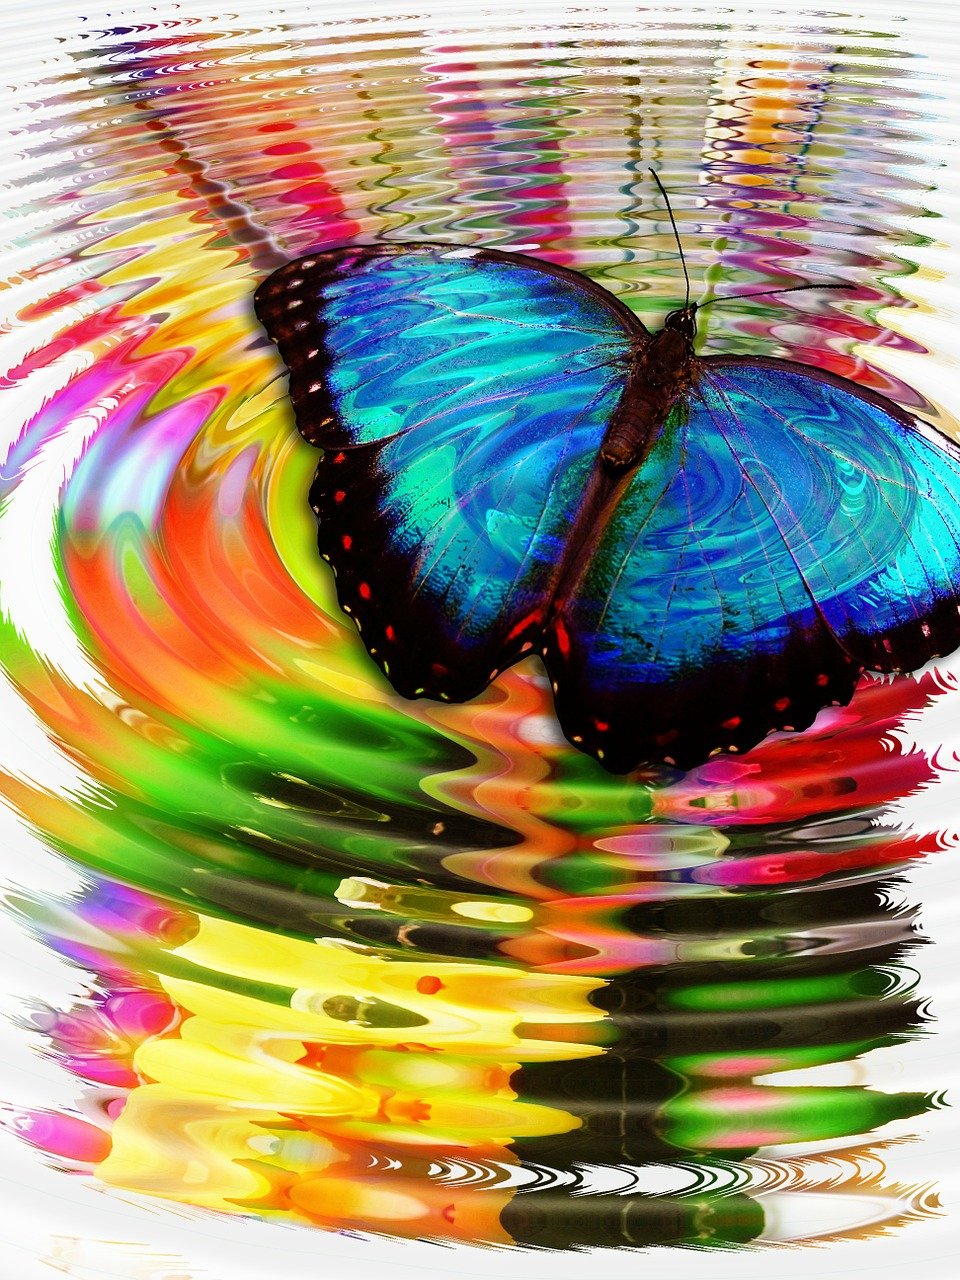 a blue butterfly sitting on top of a colorful object, by Jon Coffelt, flickr, psychedelic art, rippling reflections, photoshop water art, digital art - w 640, butterfly jewelry